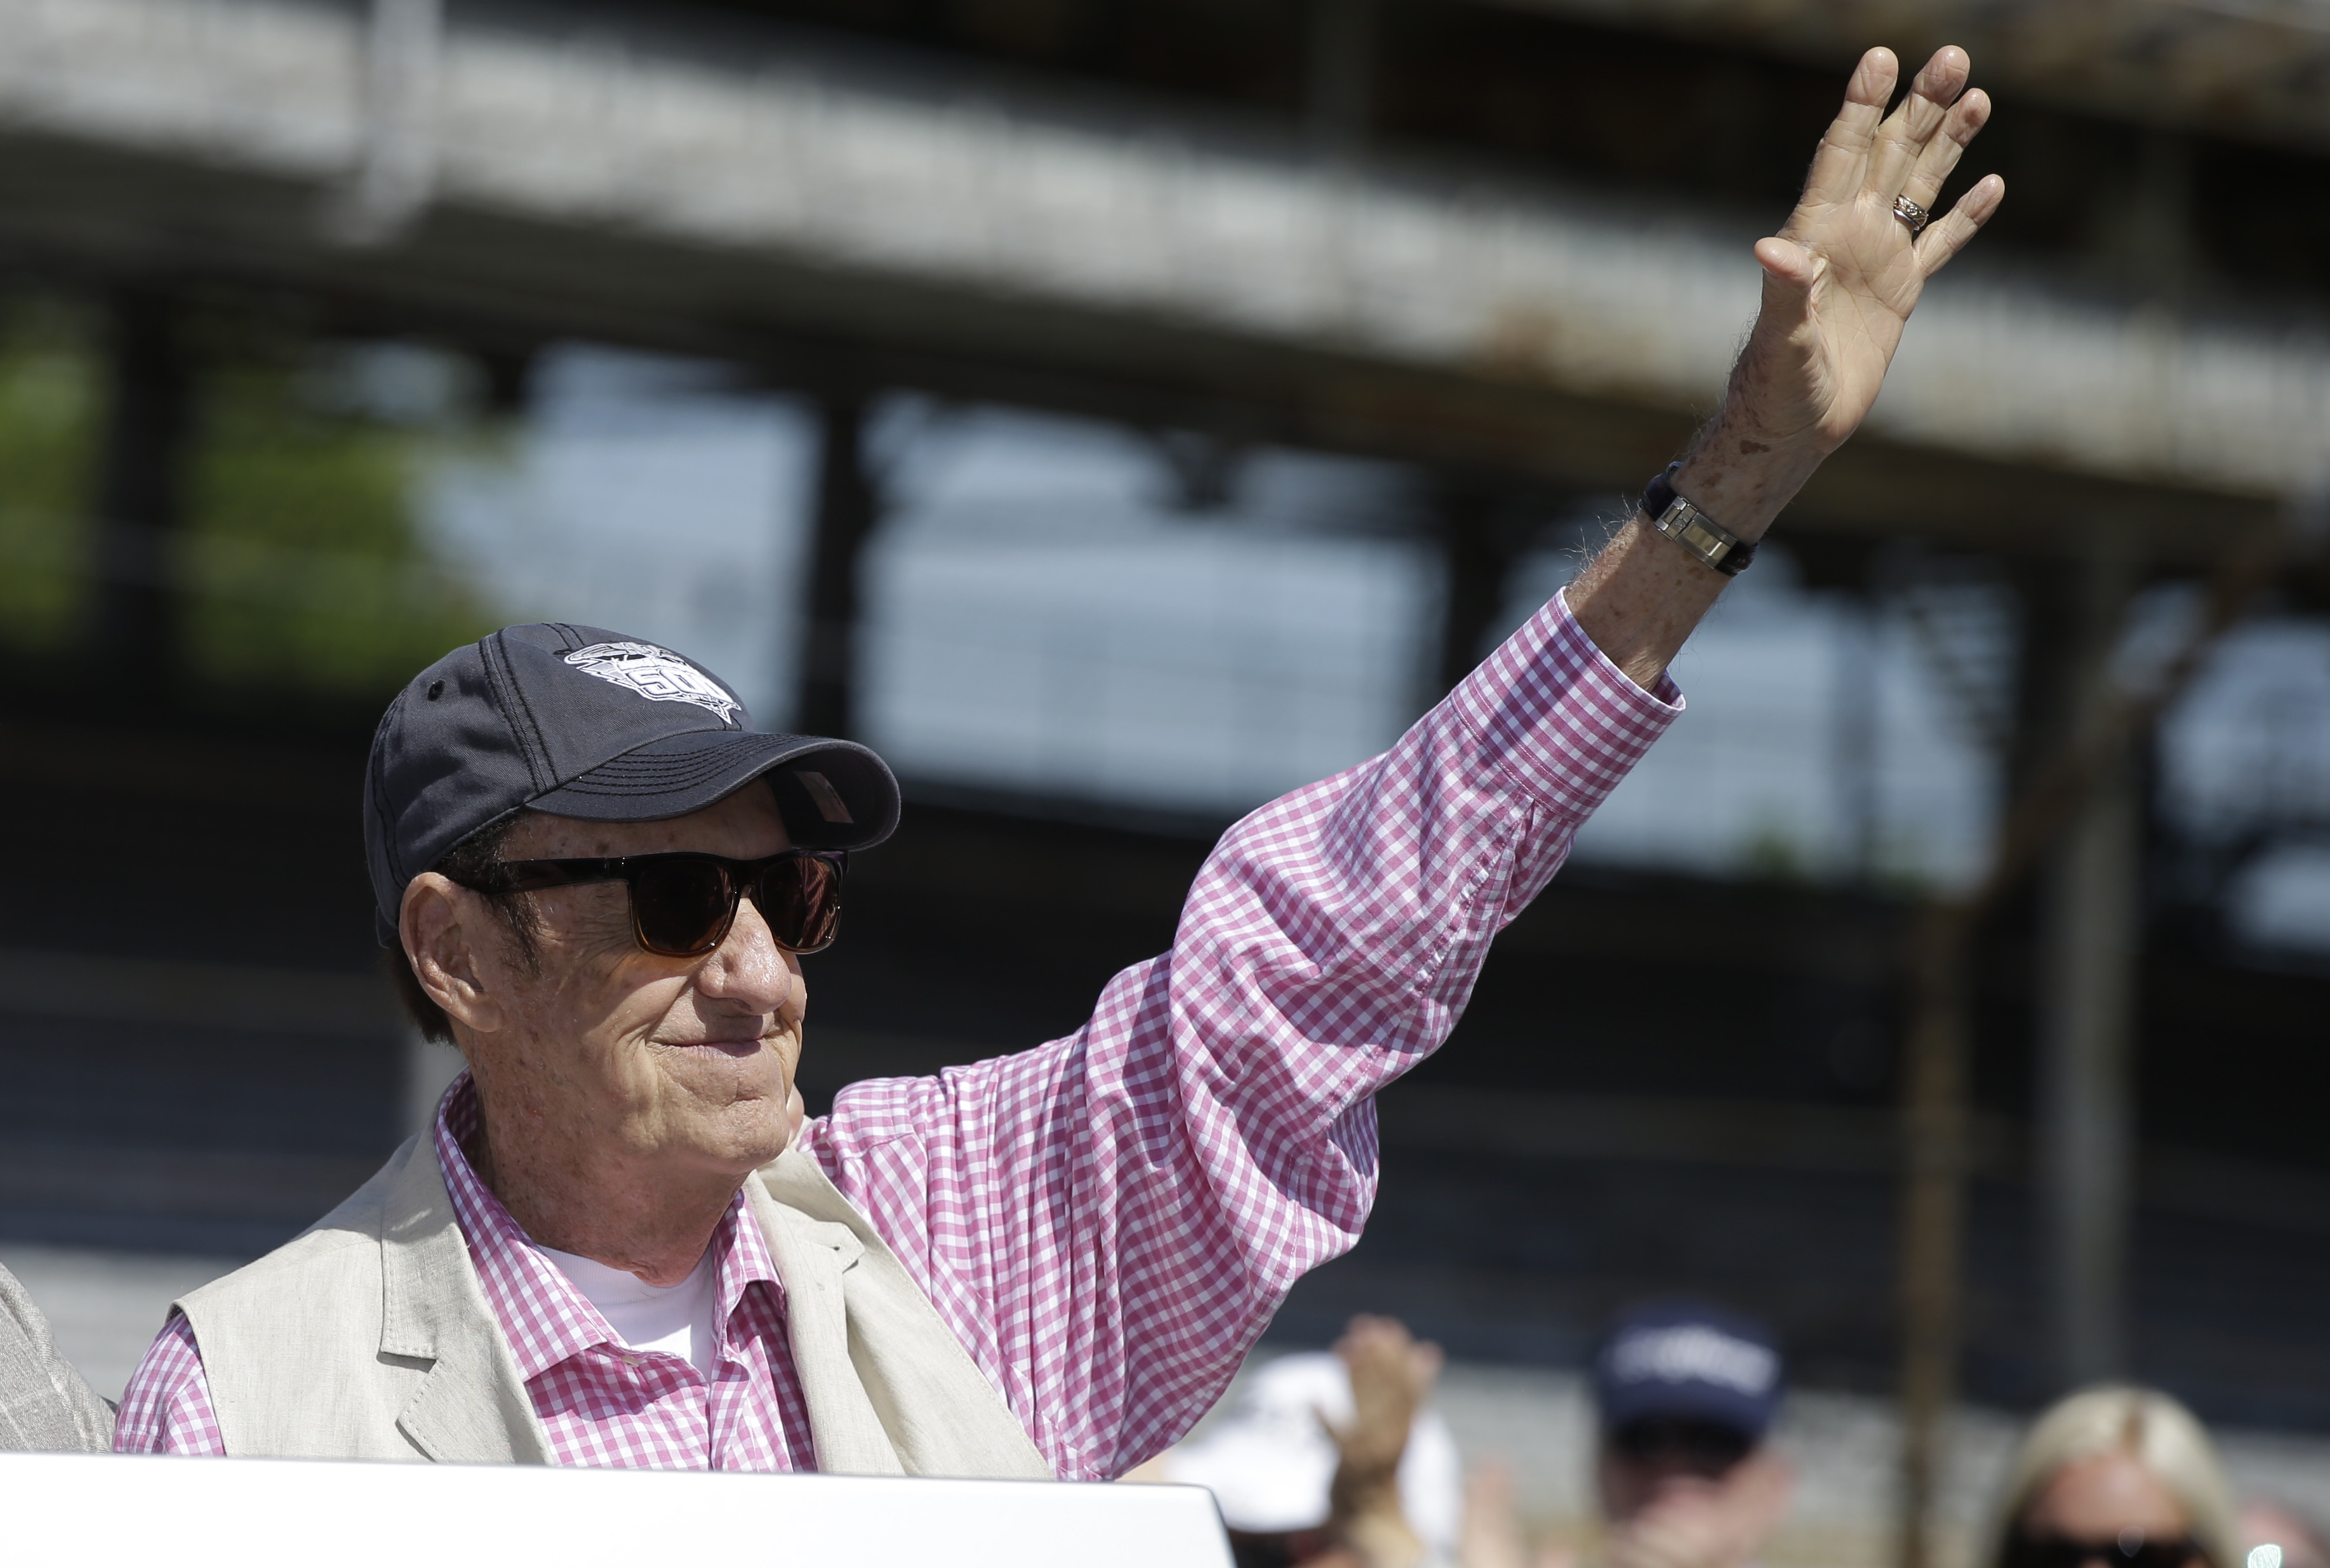 After more than 4 decades, Jim Nabors to sing 'Back Home Again in